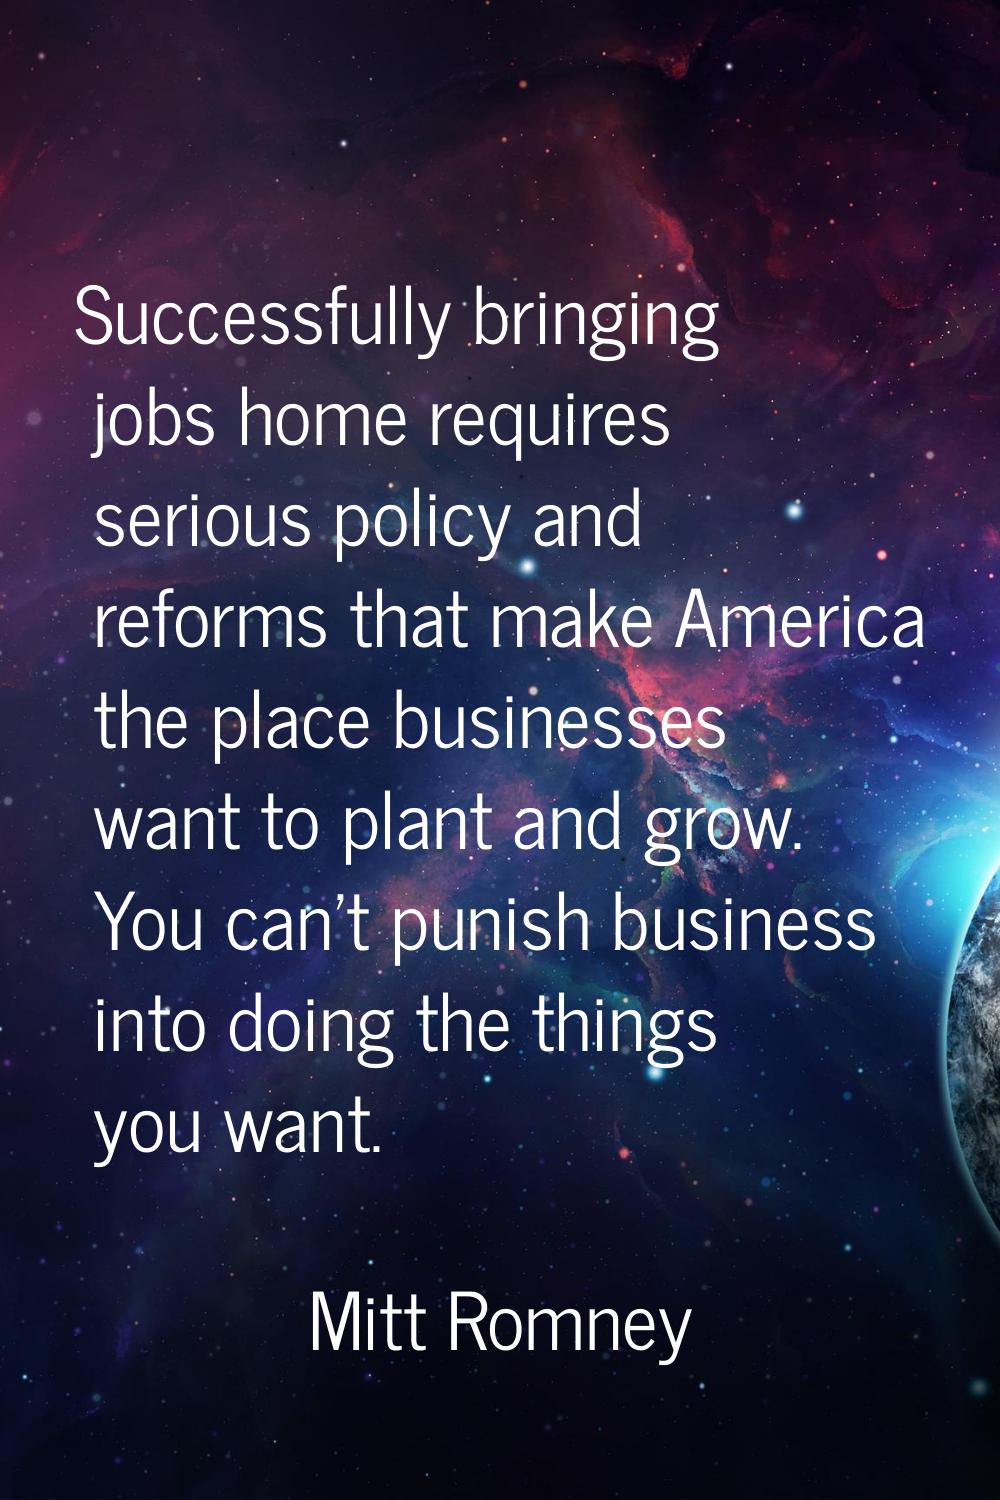 Successfully bringing jobs home requires serious policy and reforms that make America the place bus